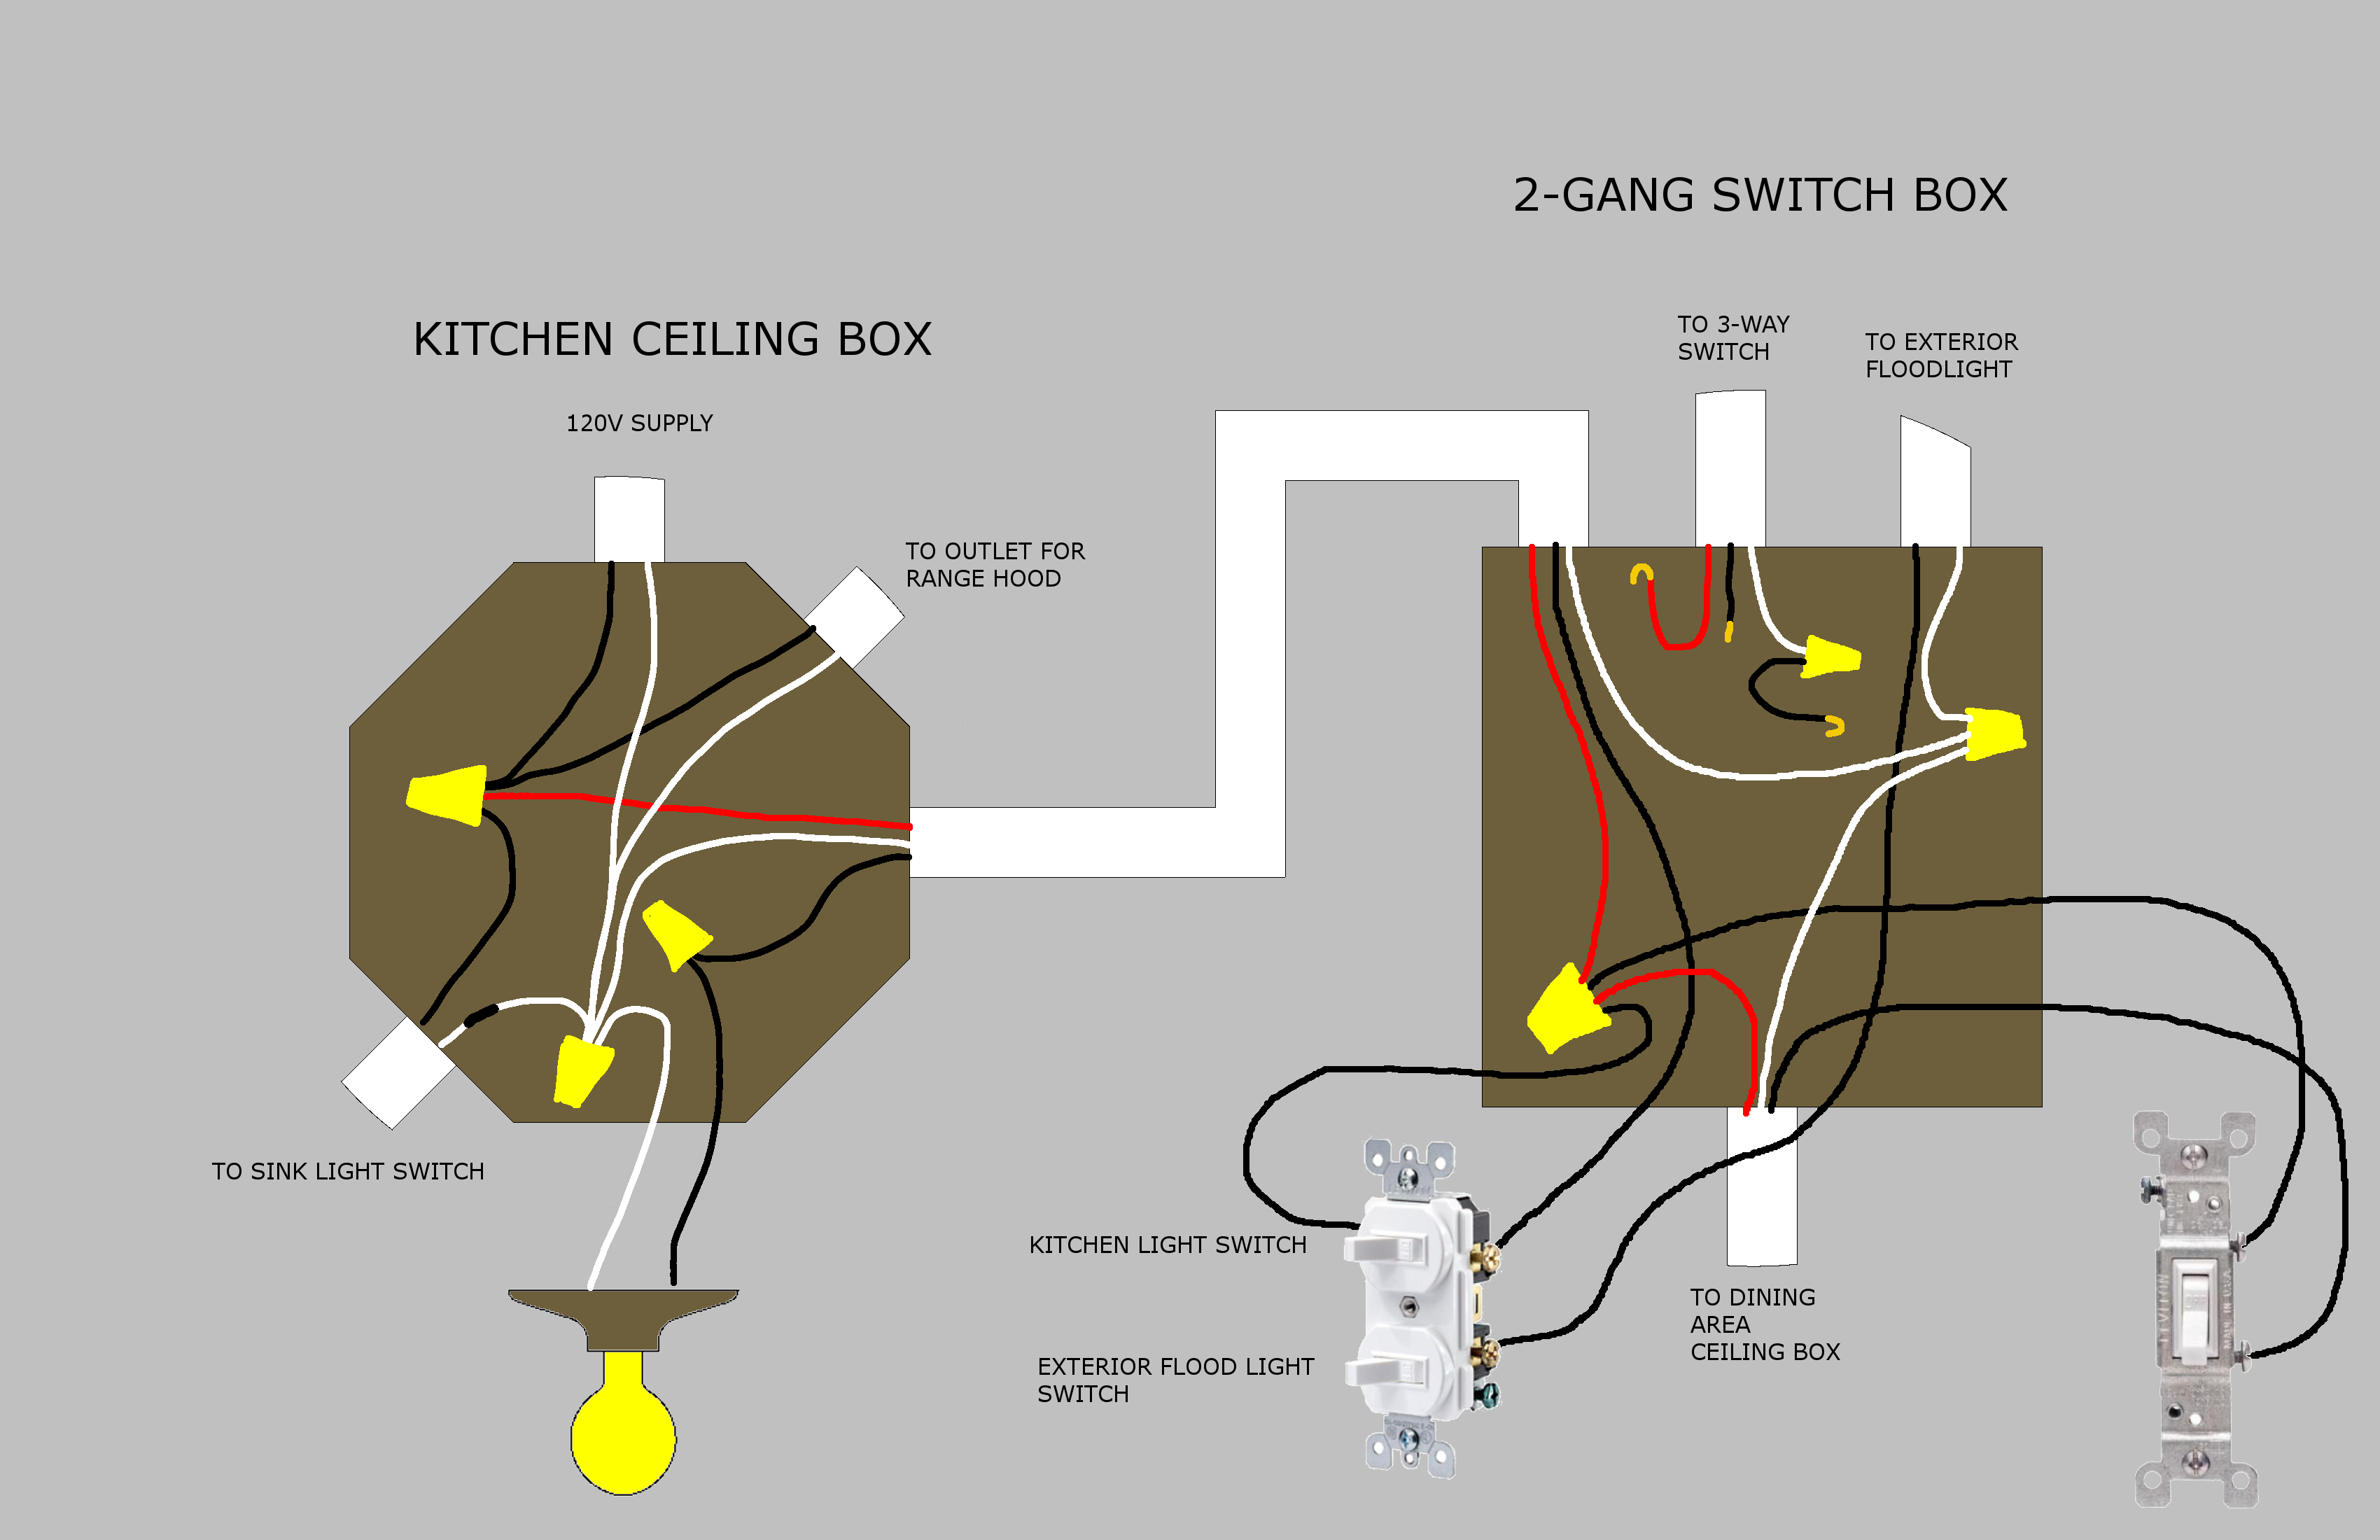 4Way Switch Wiring Diagram Wiring Switch Outlet Bo Receptacle Furthermore Wiring A 4 Way Switch